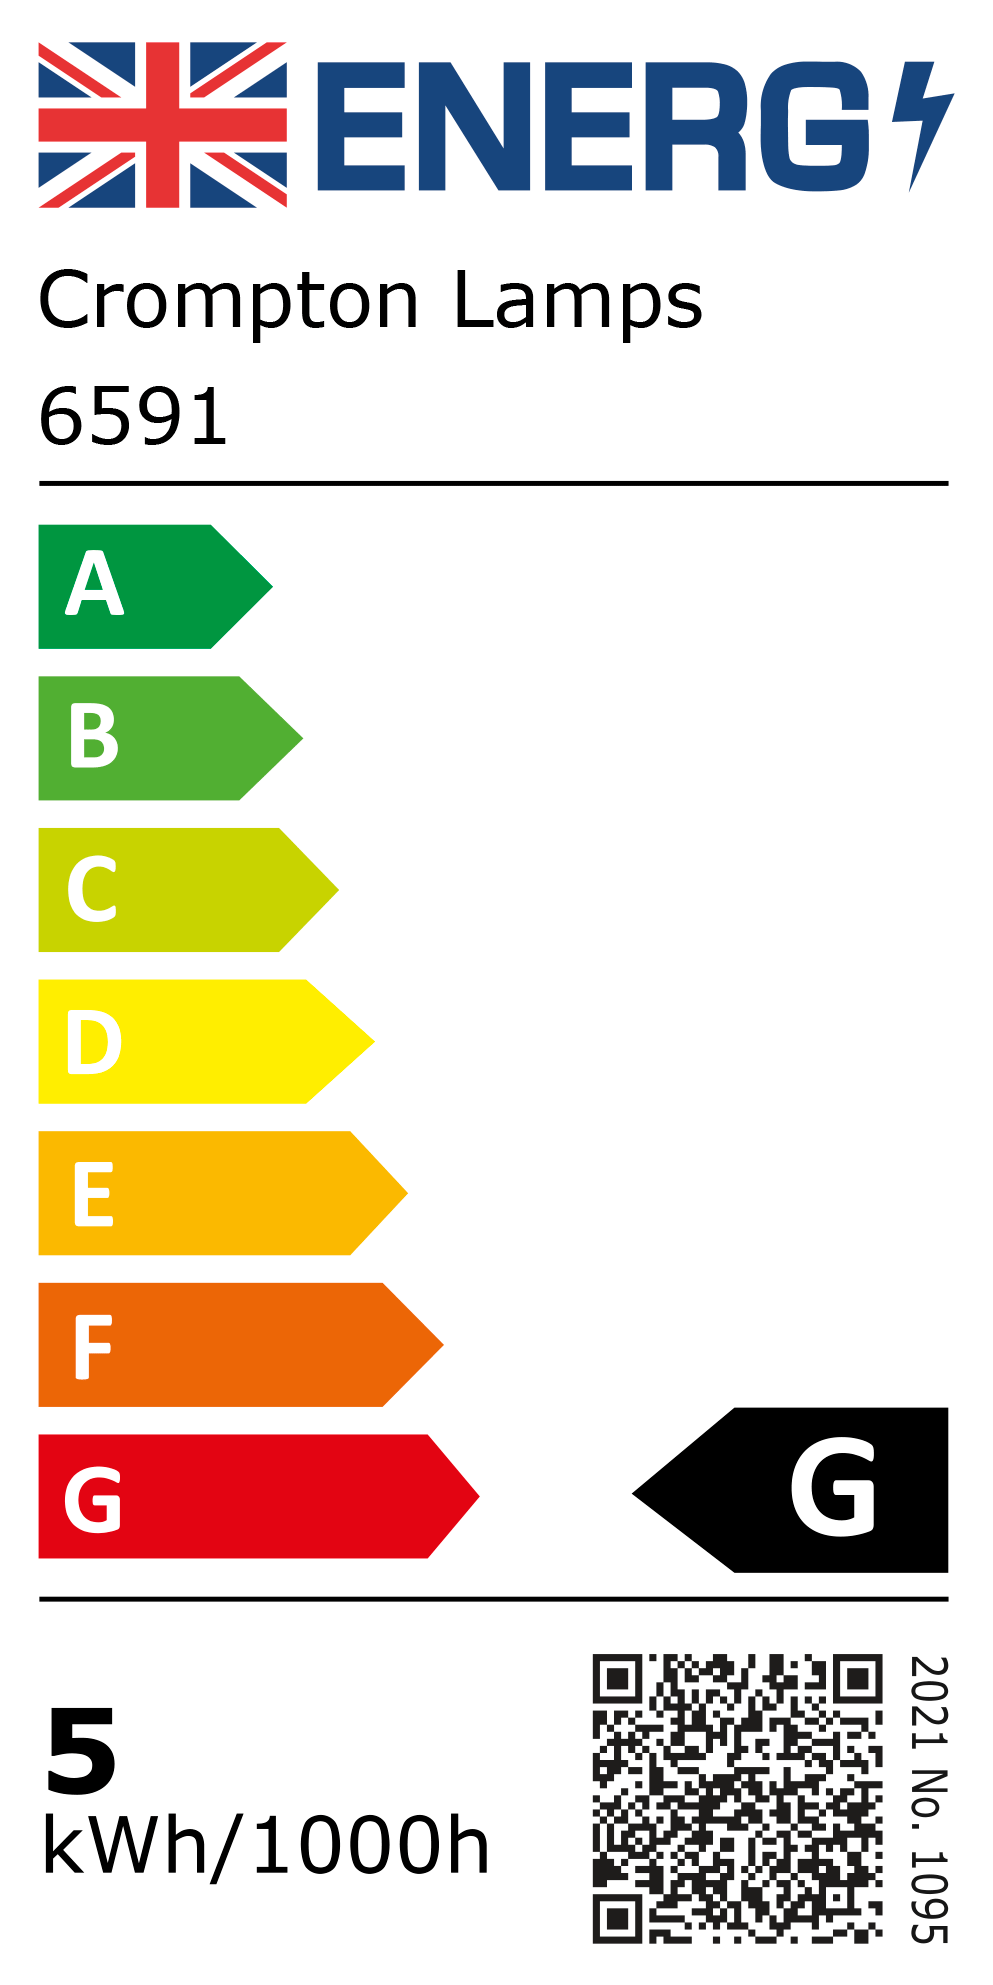 New 2021 Energy Rating Label: Stock Code 6591